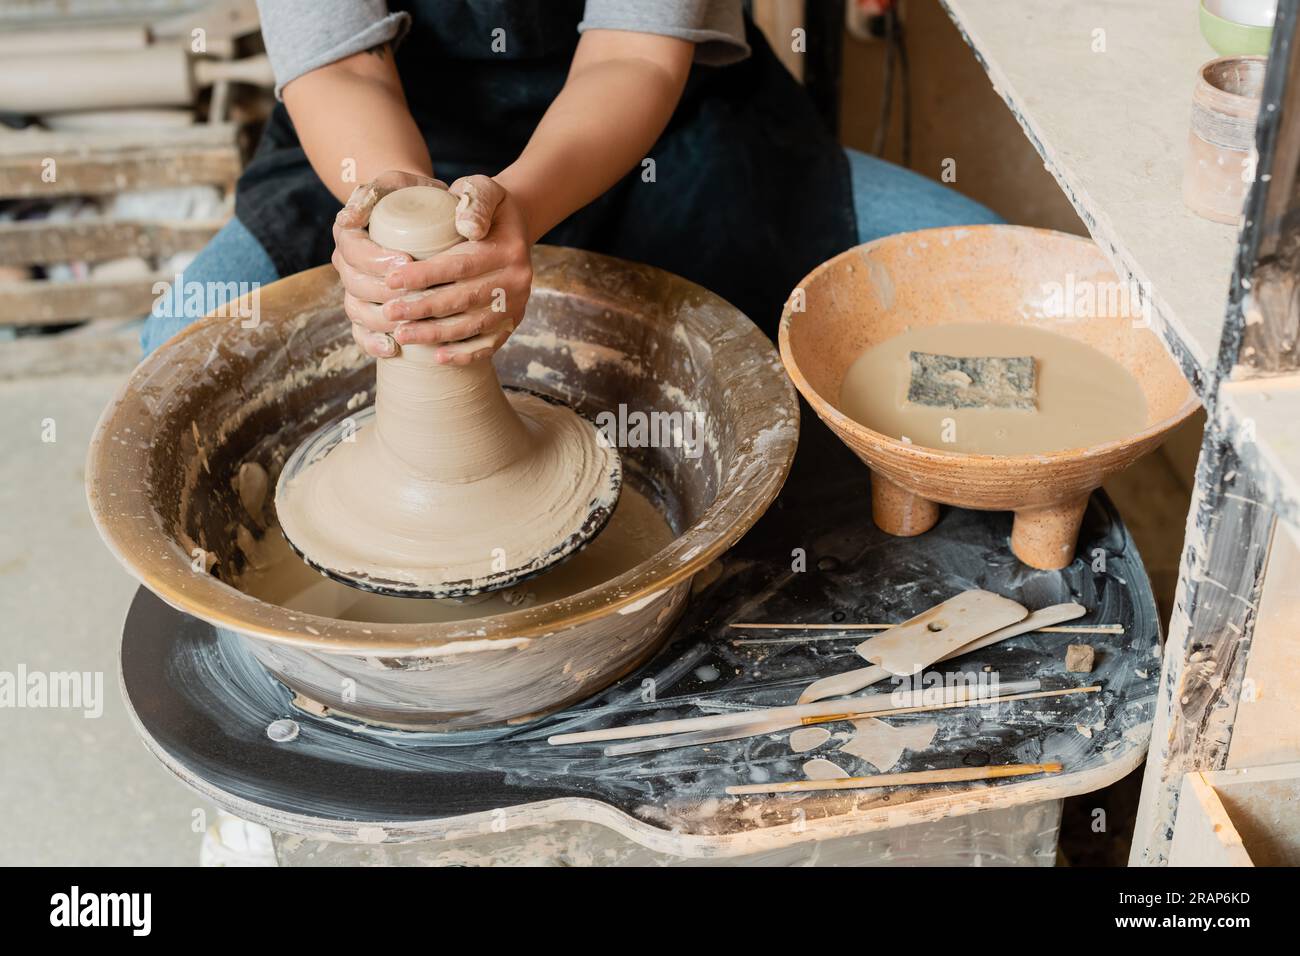 Cropped view of young female artisan in apron molding wet clay on pottery wheel near bowl with water, sponge and tools on table in ceramic workshop, p Stock Photo